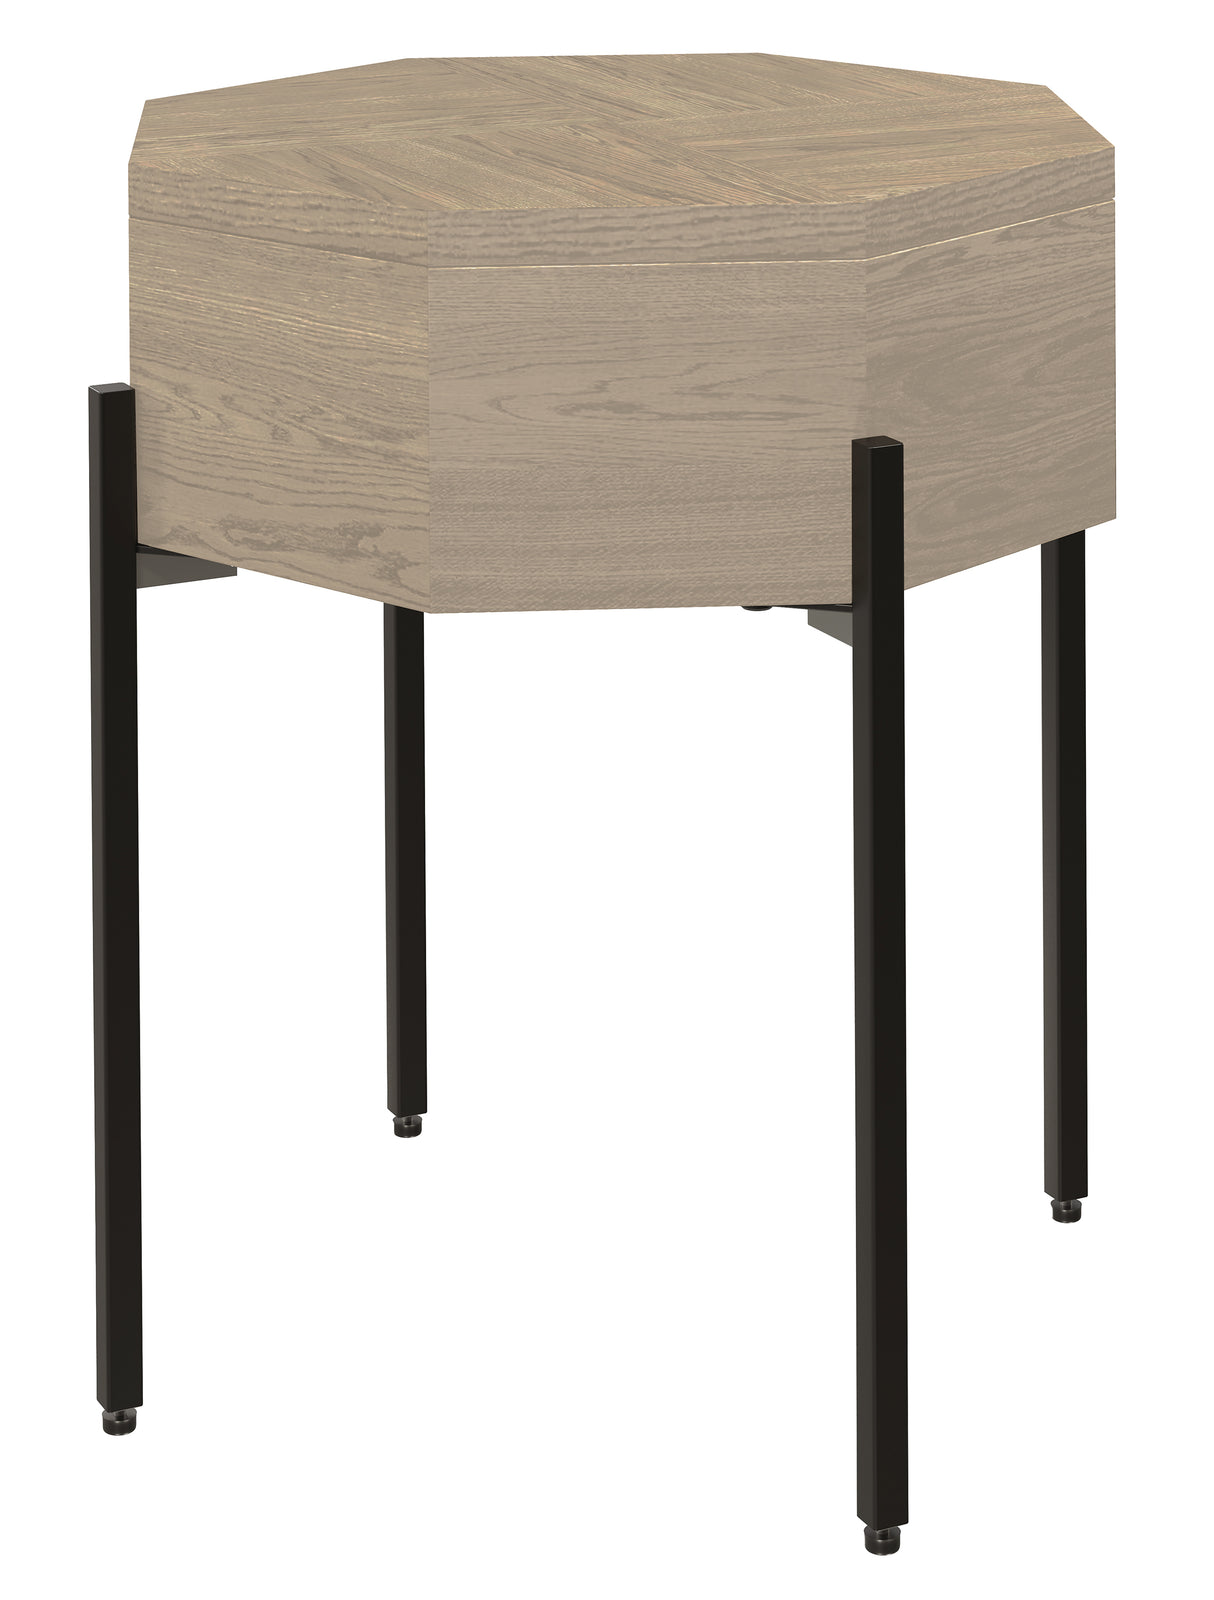 Hekman 25912 Mayfield 24.75in. x 24.75in. x 26in. End Table